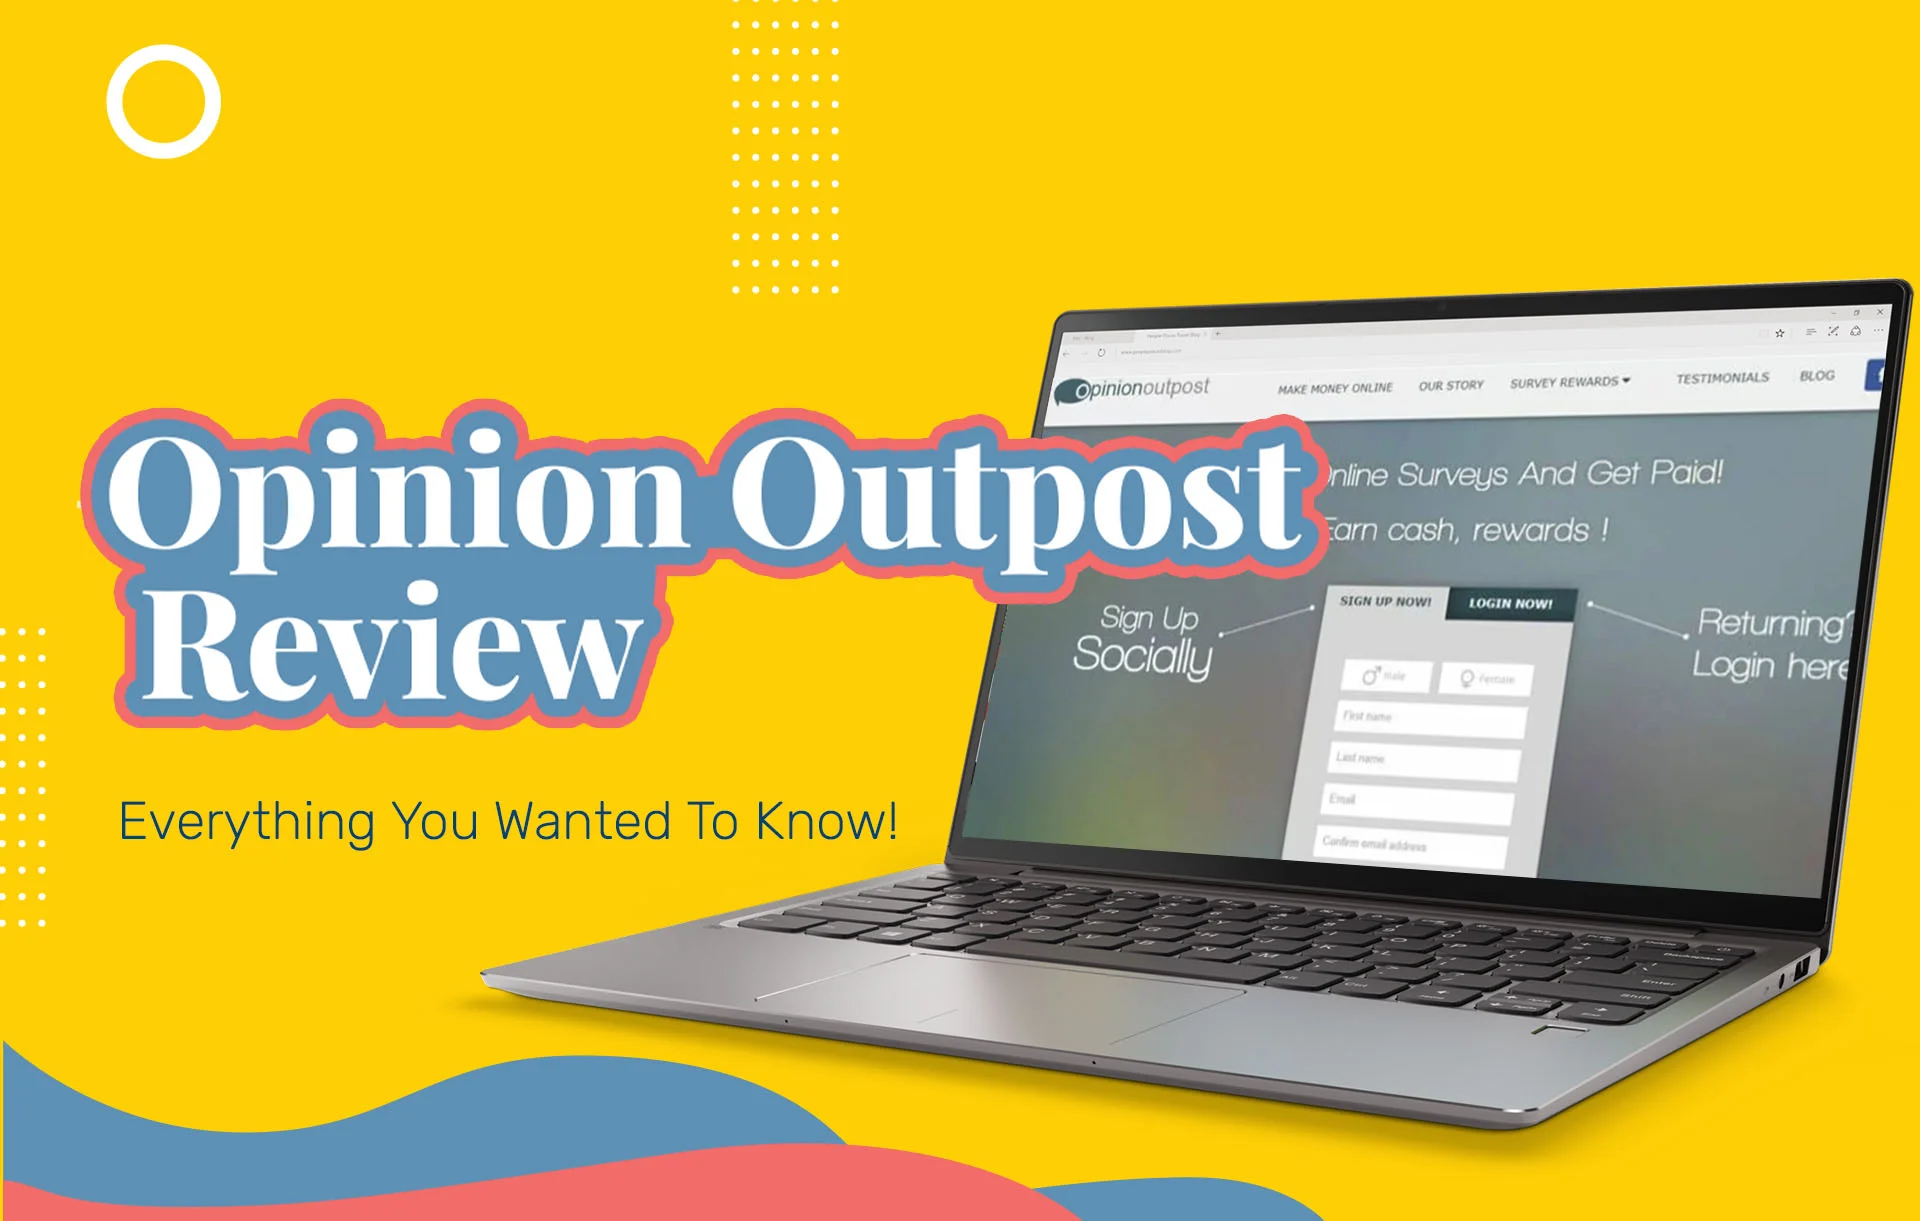 Opinion Outpost Reviews: Best Surveys Company?